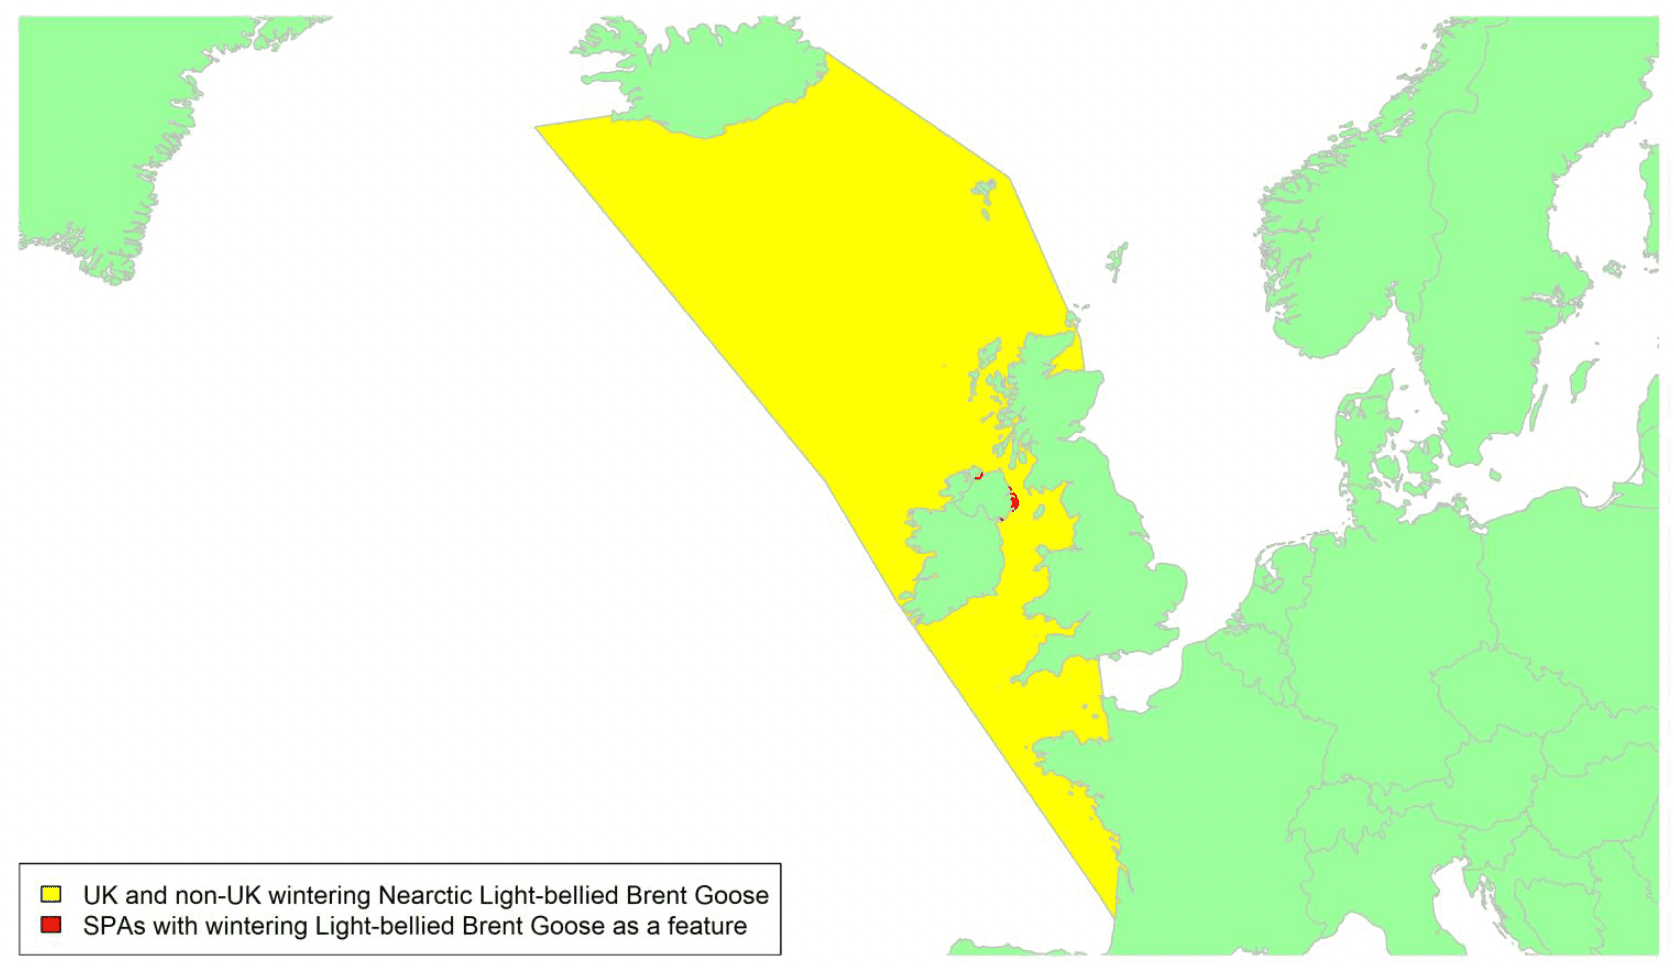 Map of North West Europe showing migratory routes and SPAs within the UK for ‘Nearctic’ Light-bellied Brent Geese as described in the text below.